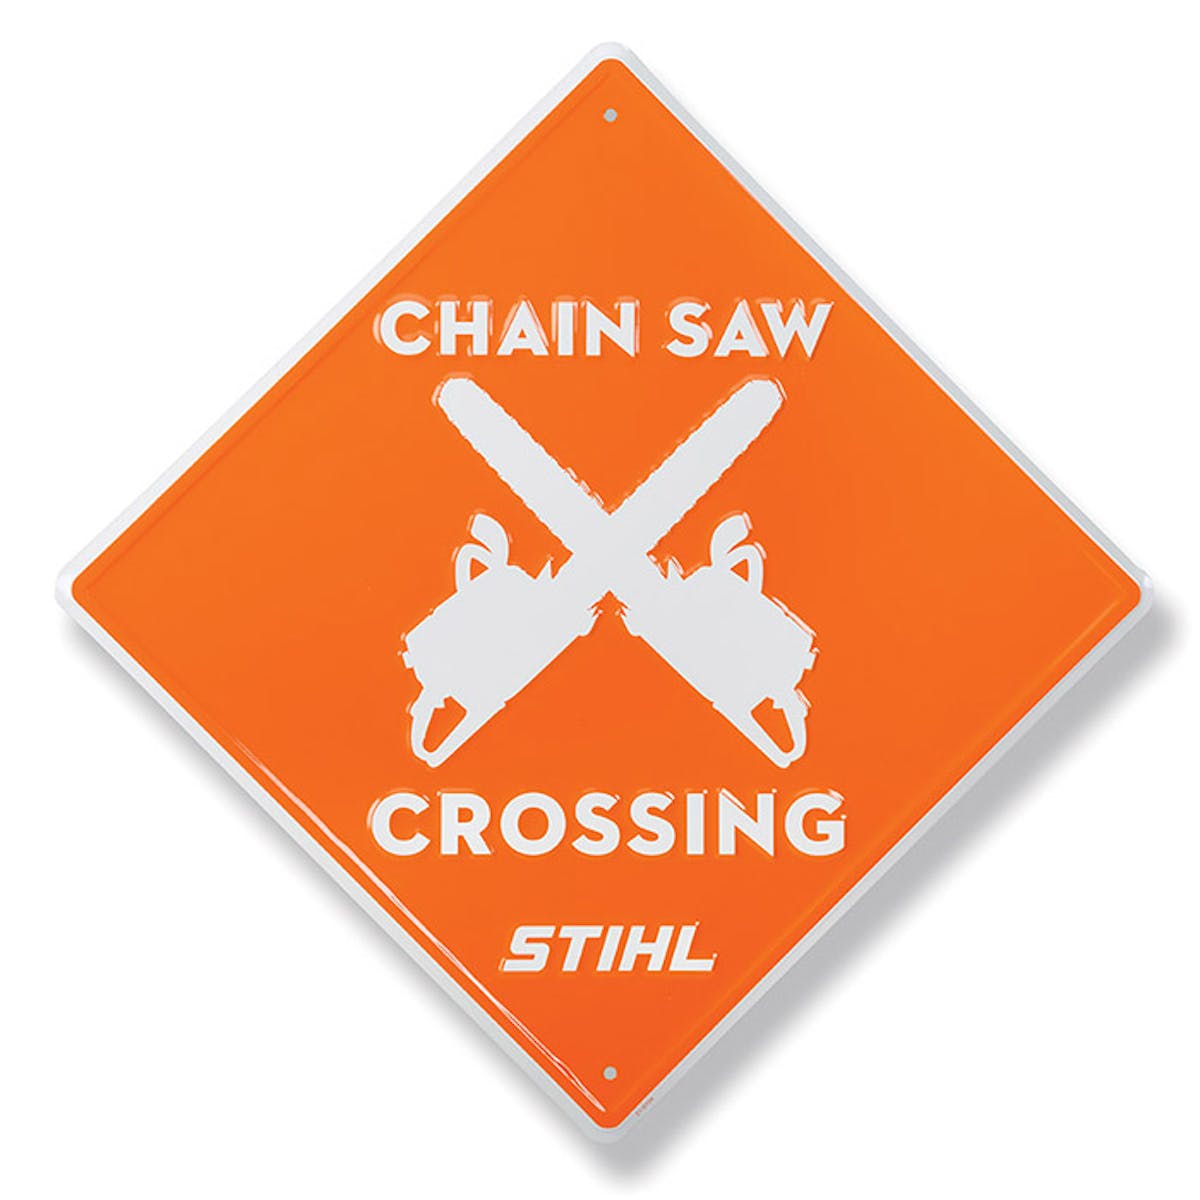 CHAIN SAW CROSSING Sign